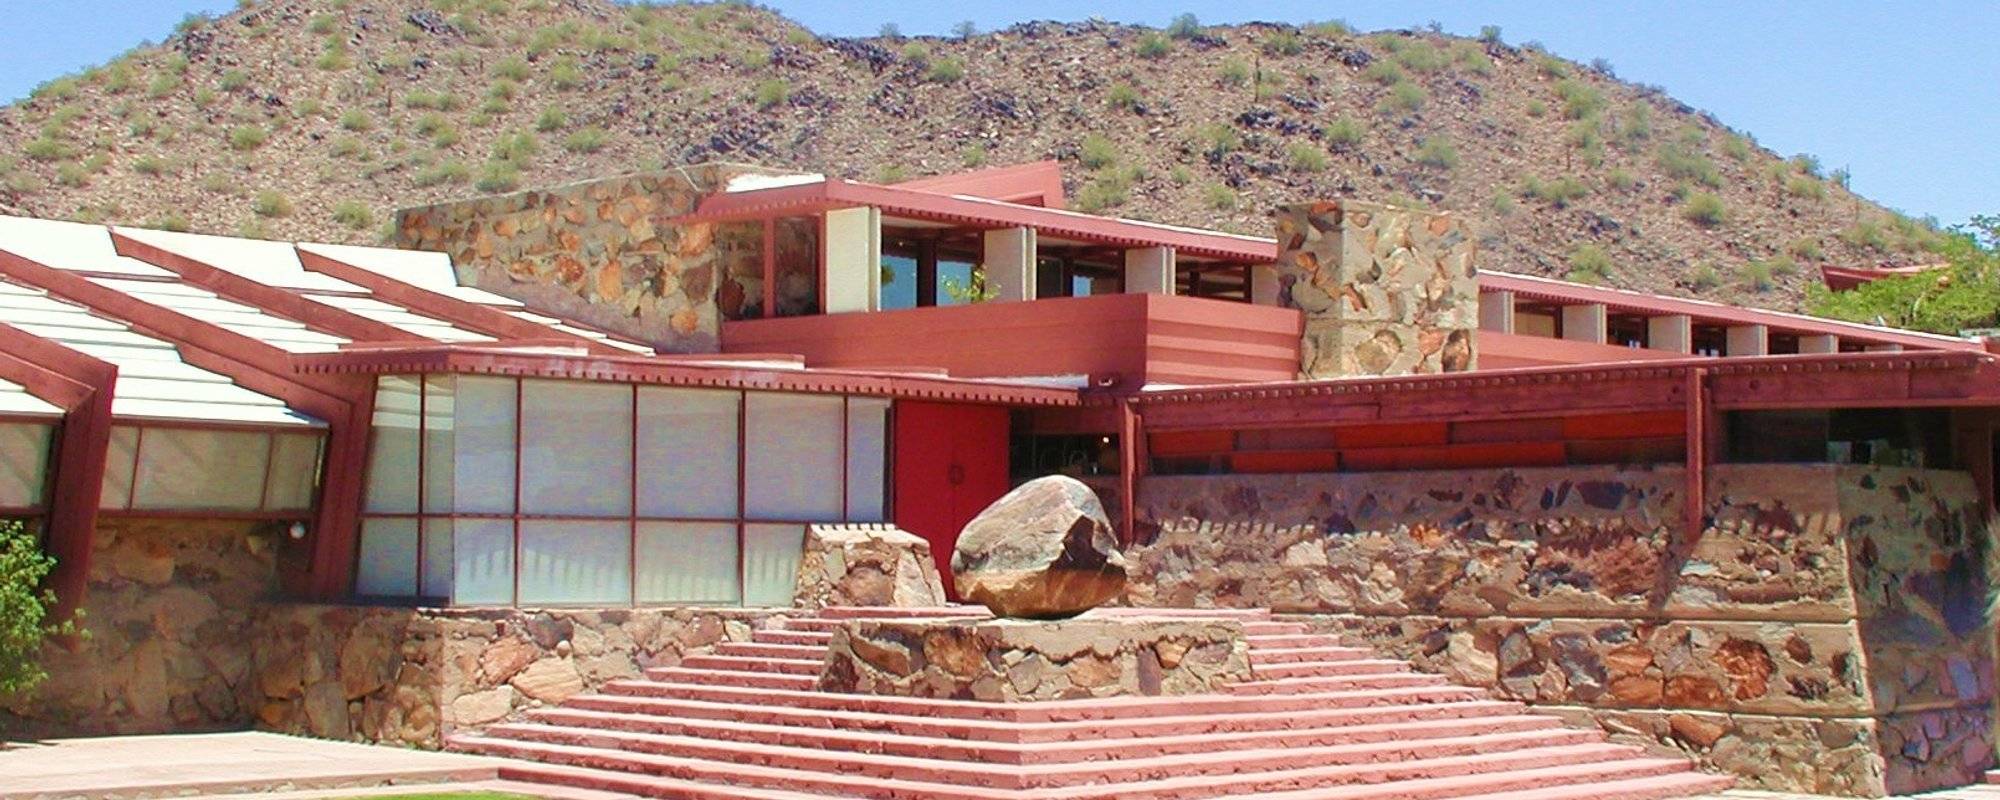 Travel - Visiting Frank Lloyd Wright’s Home and School in the Desert